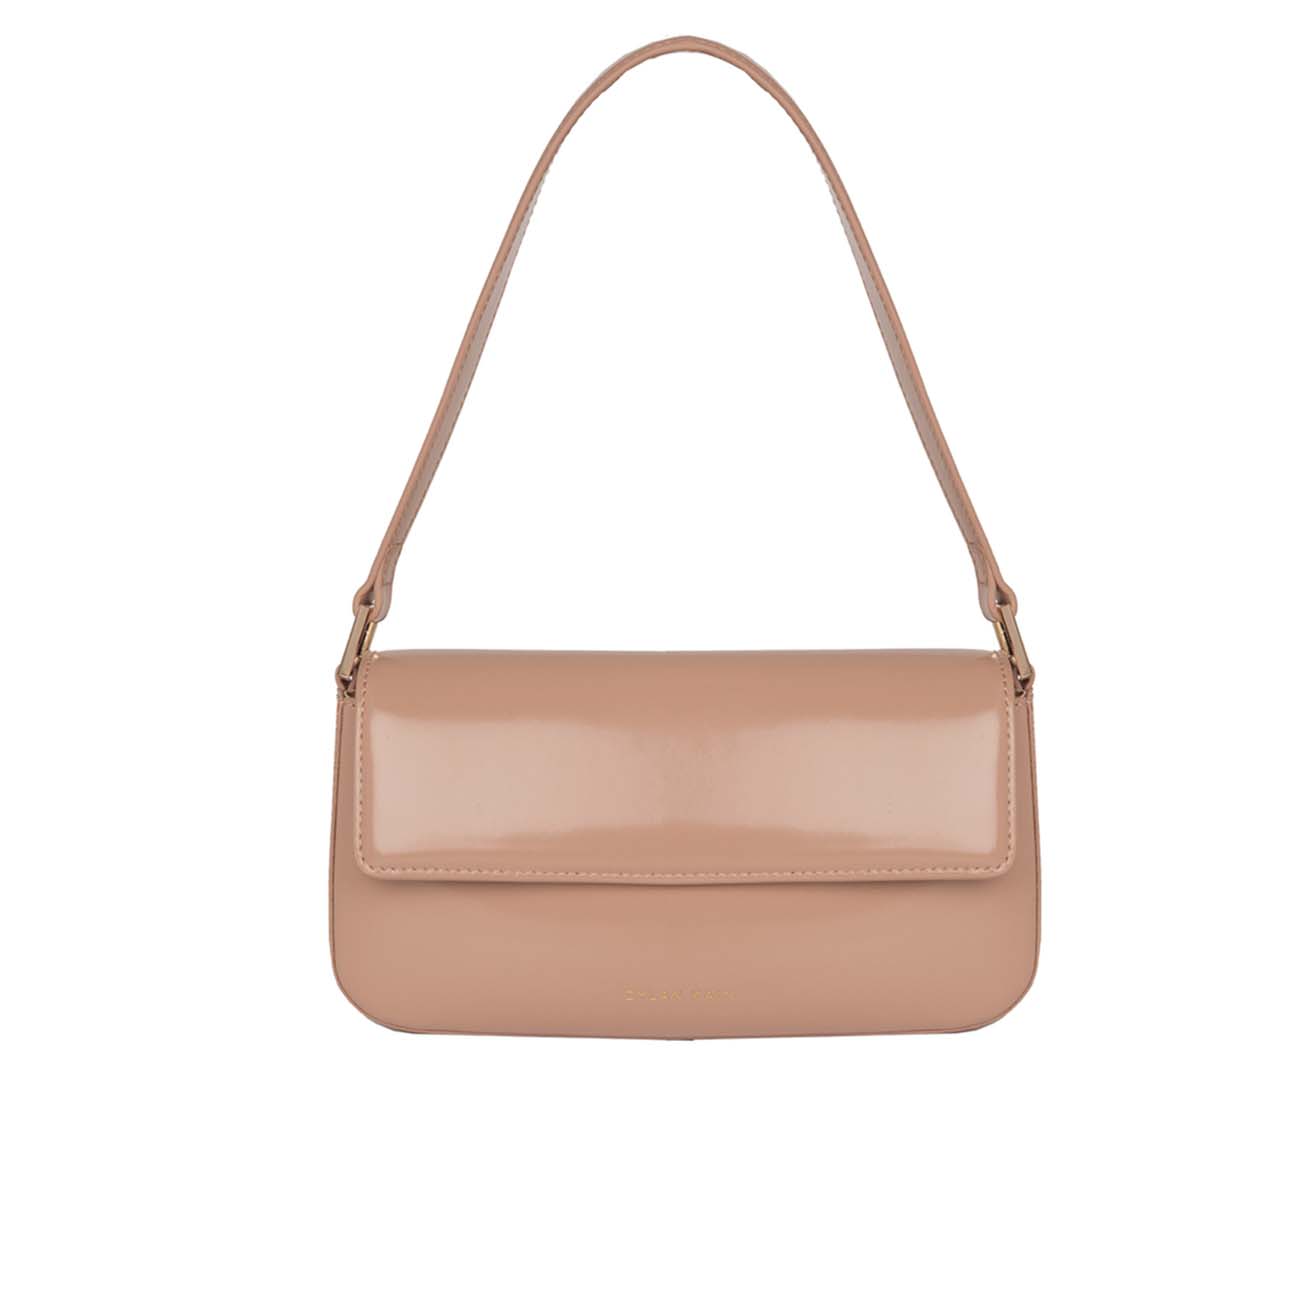 The Baguette Patent Bag Fawn Light Gold - Gift Edit